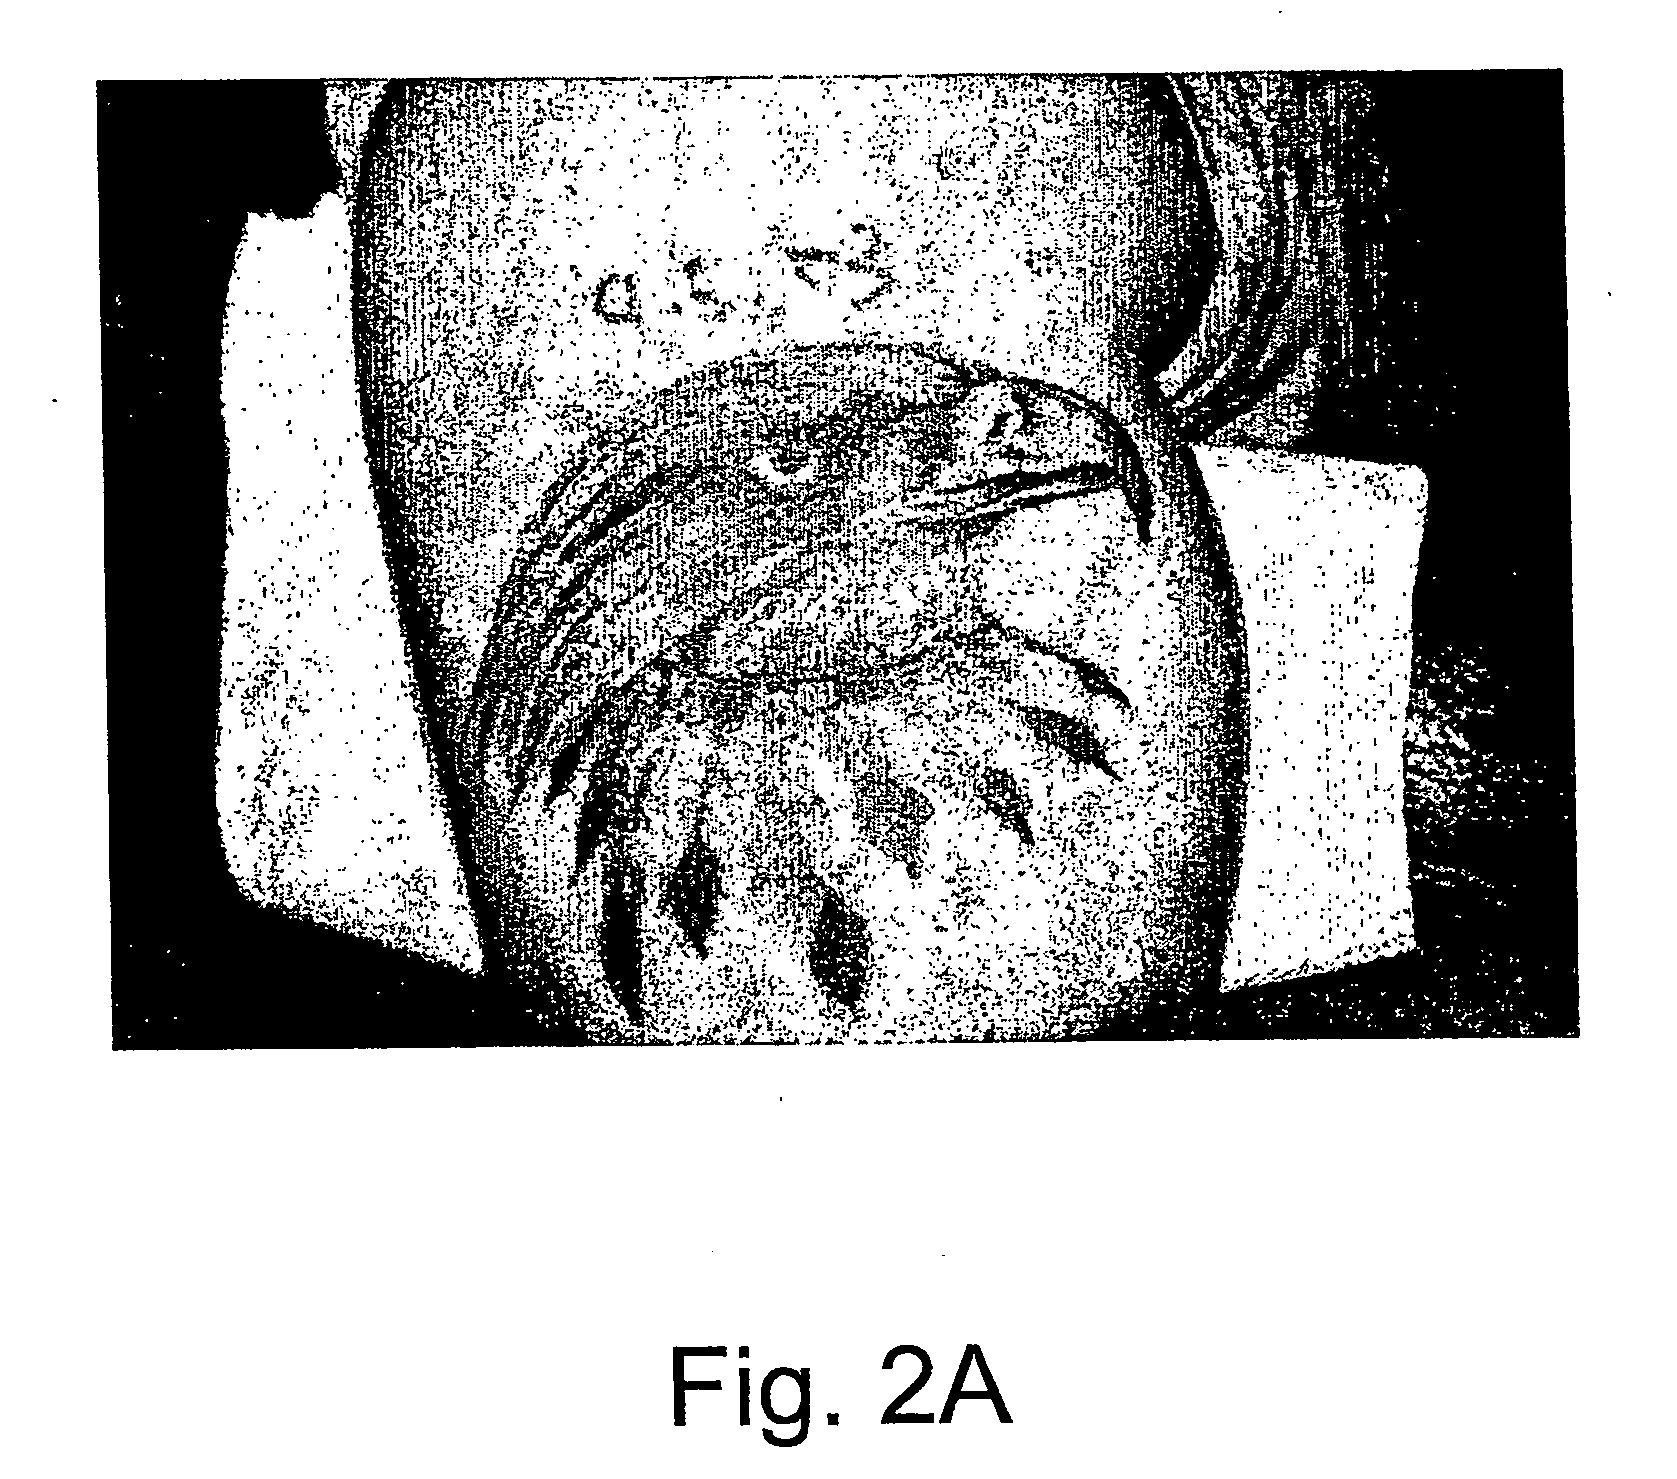 Method for removing pigments from a pigmented section of skin